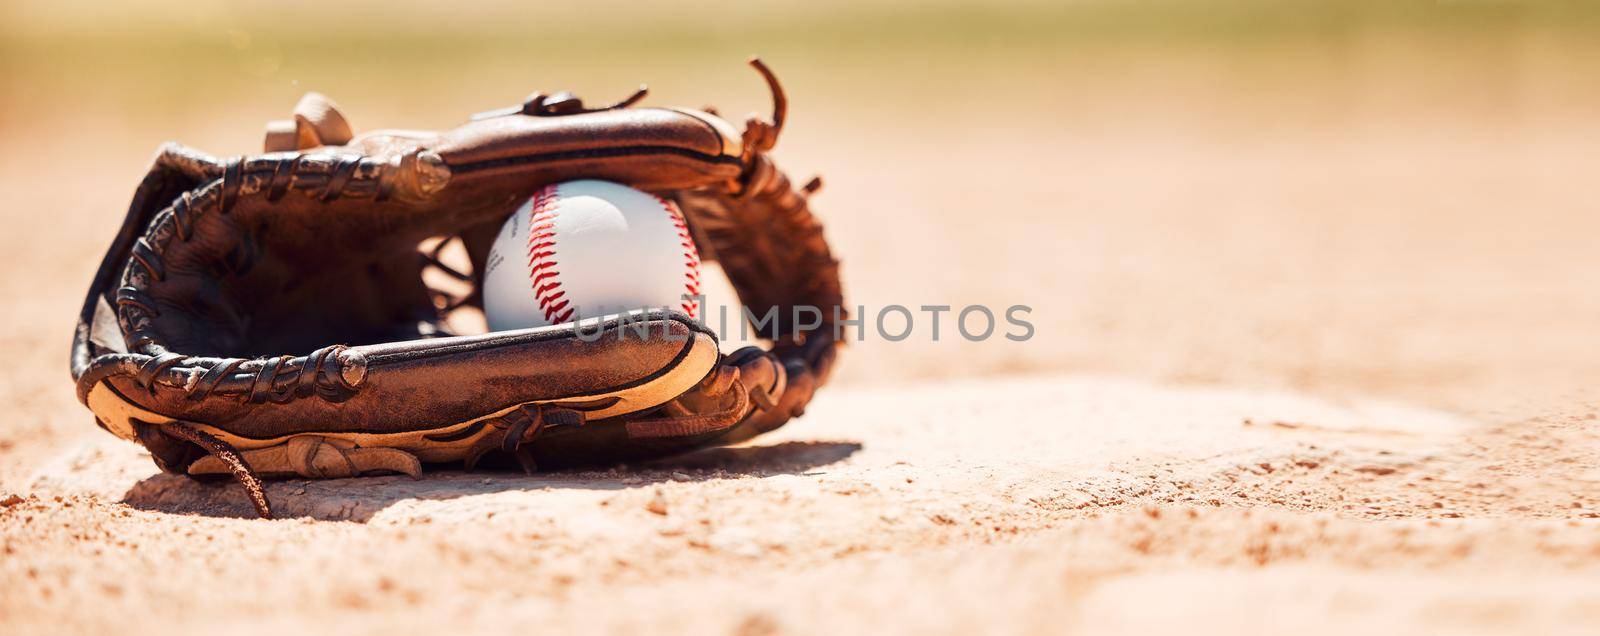 Baseball field, softball and ball, glove and base plate on pitch ground, field and turf outdoors for competition, game or match. Background for sports homerun, strike and training contest equipment by YuriArcurs